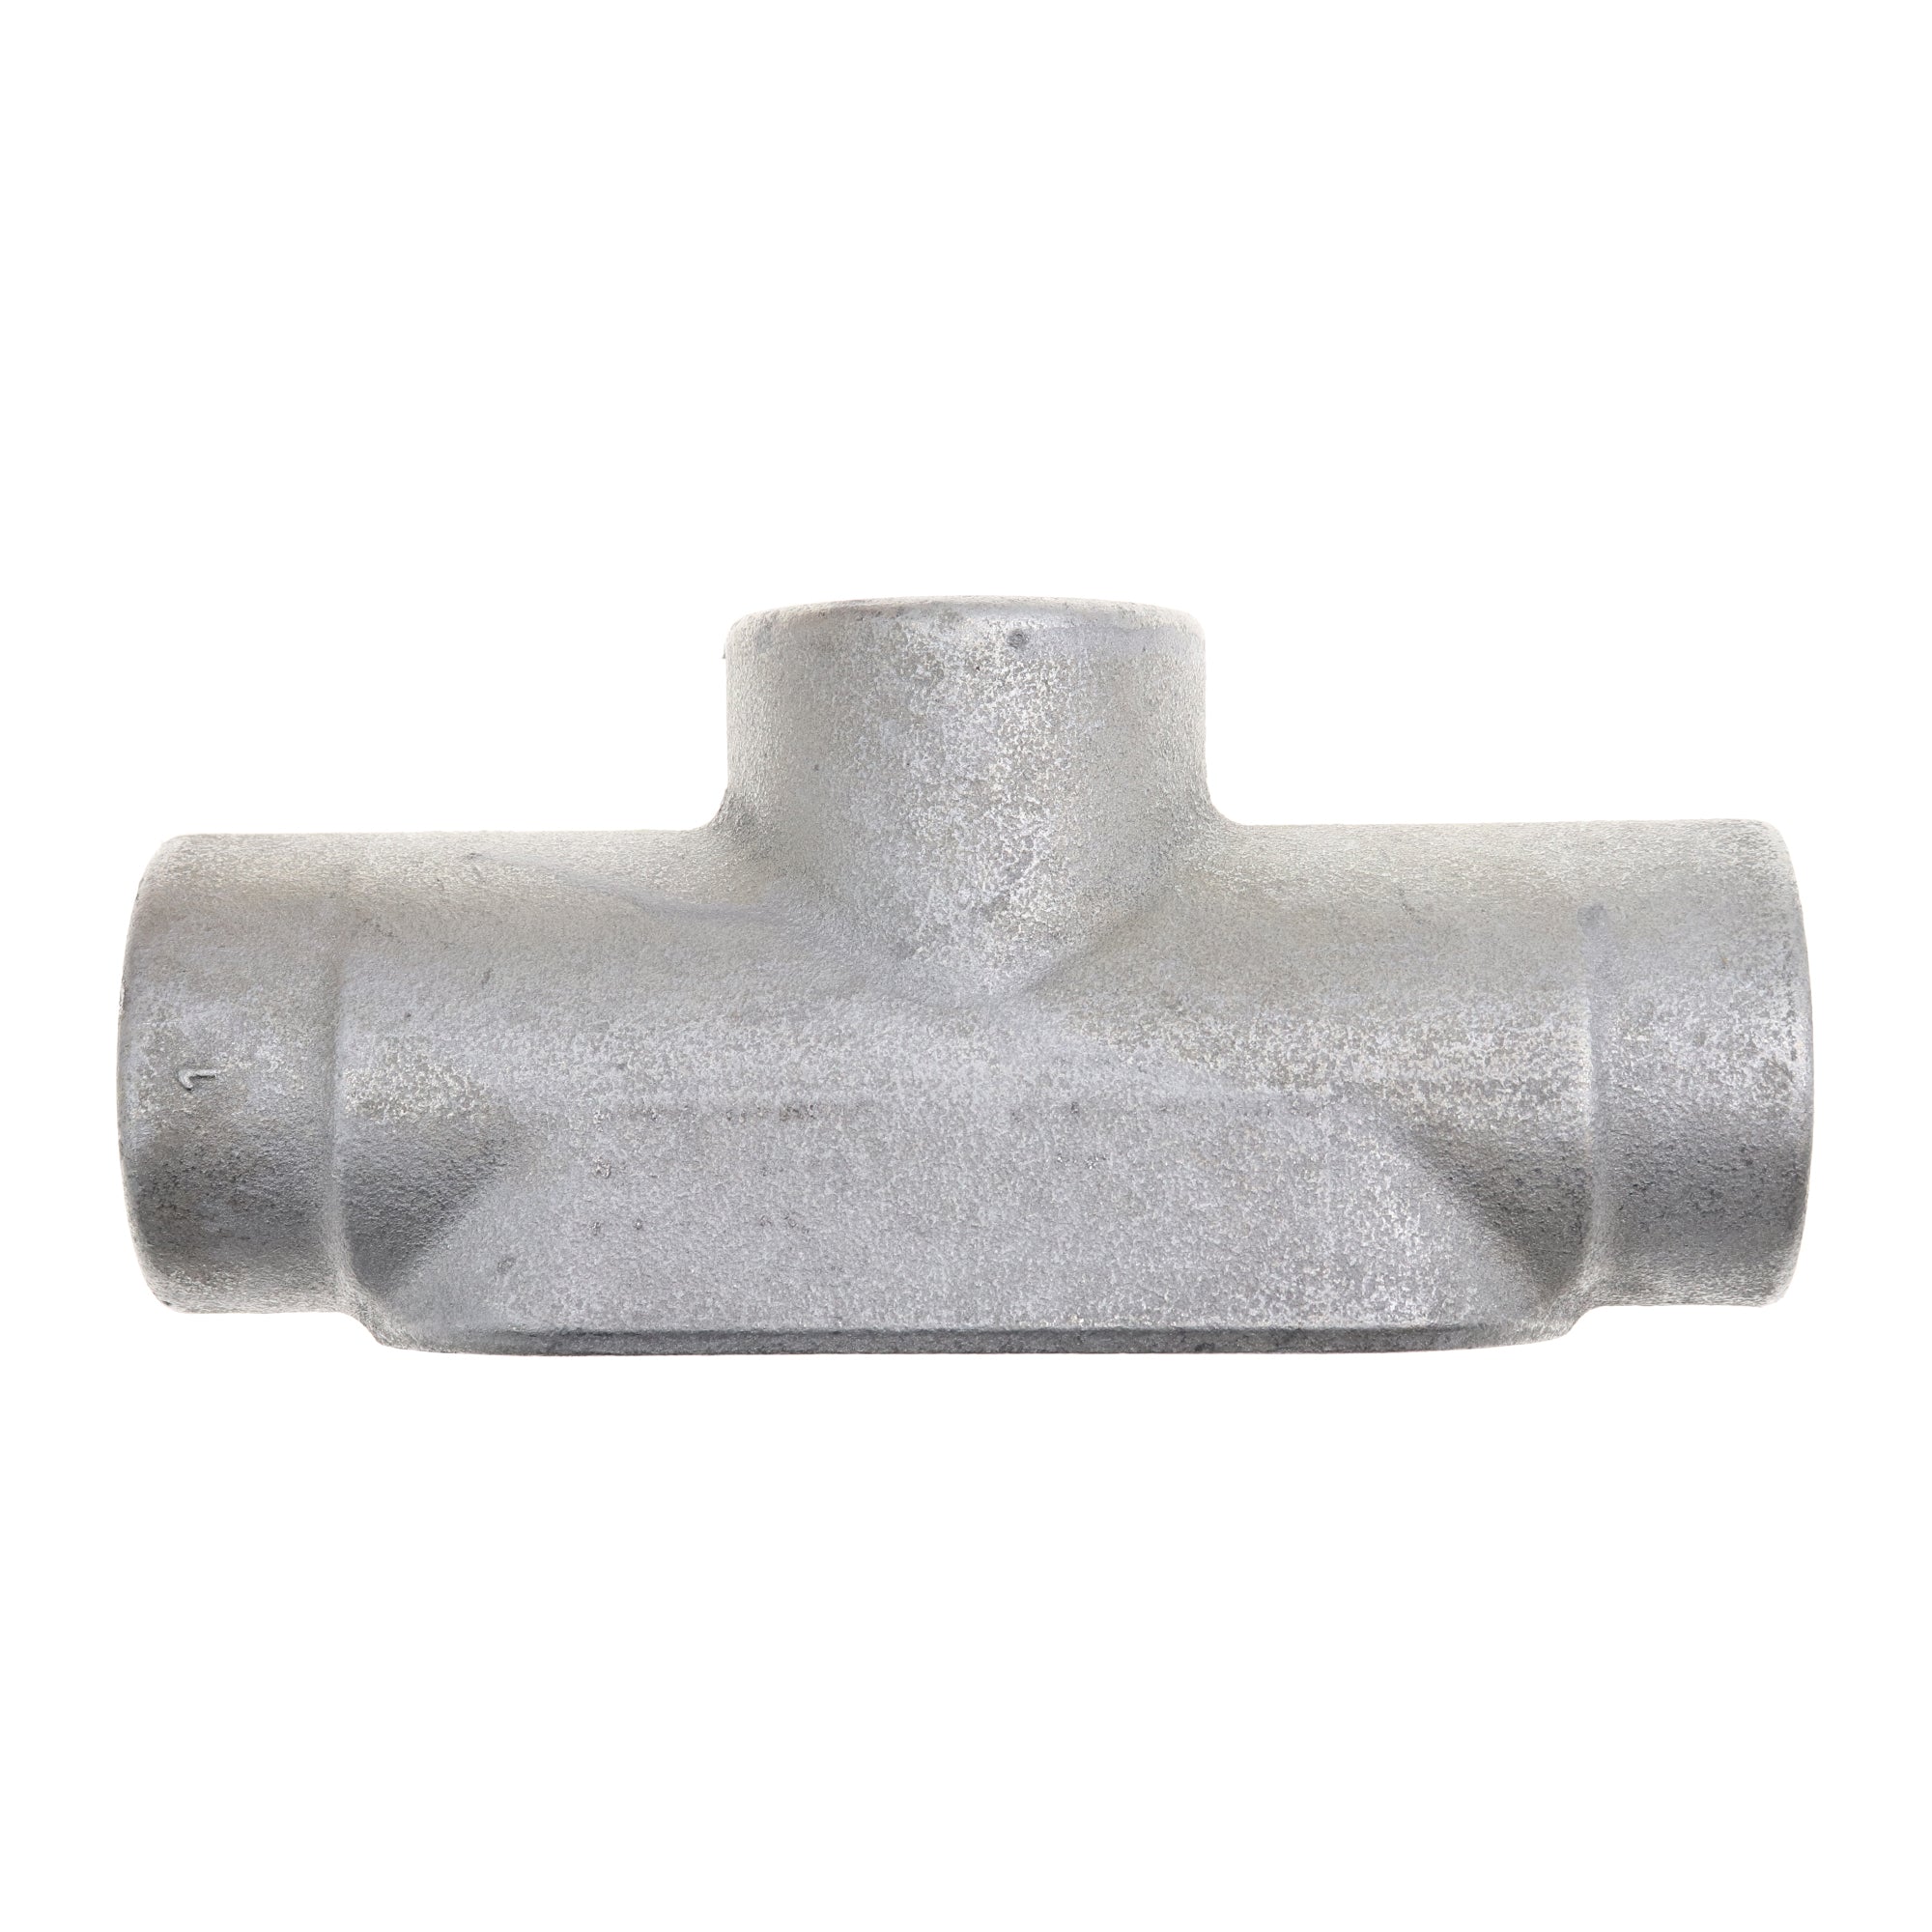 Crouse Hinds, CROUSE-HINDS TB57 CONDULET FORM-7 CONDUIT OUTLET BODY, TB-SHAPE, 1-1/2-INCH